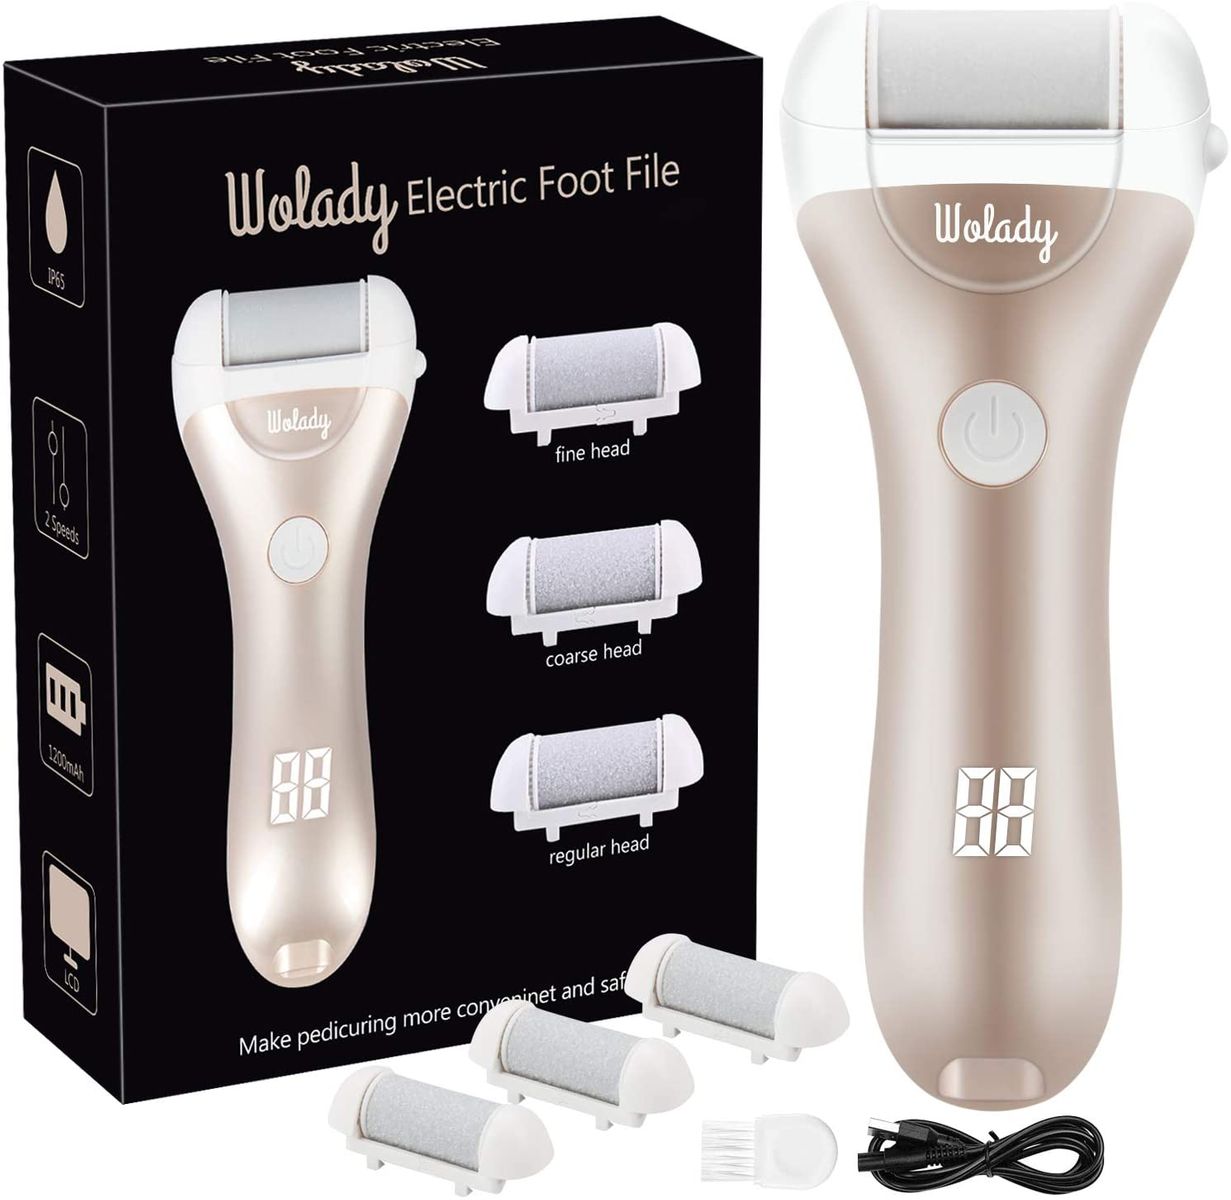 Wolady 3 Rolls Electric Foot File Pedicure Callus Remover Professional Pedicure Tool Electric Rechargeable 1200mAh Battery 2 Speed Goldfarben